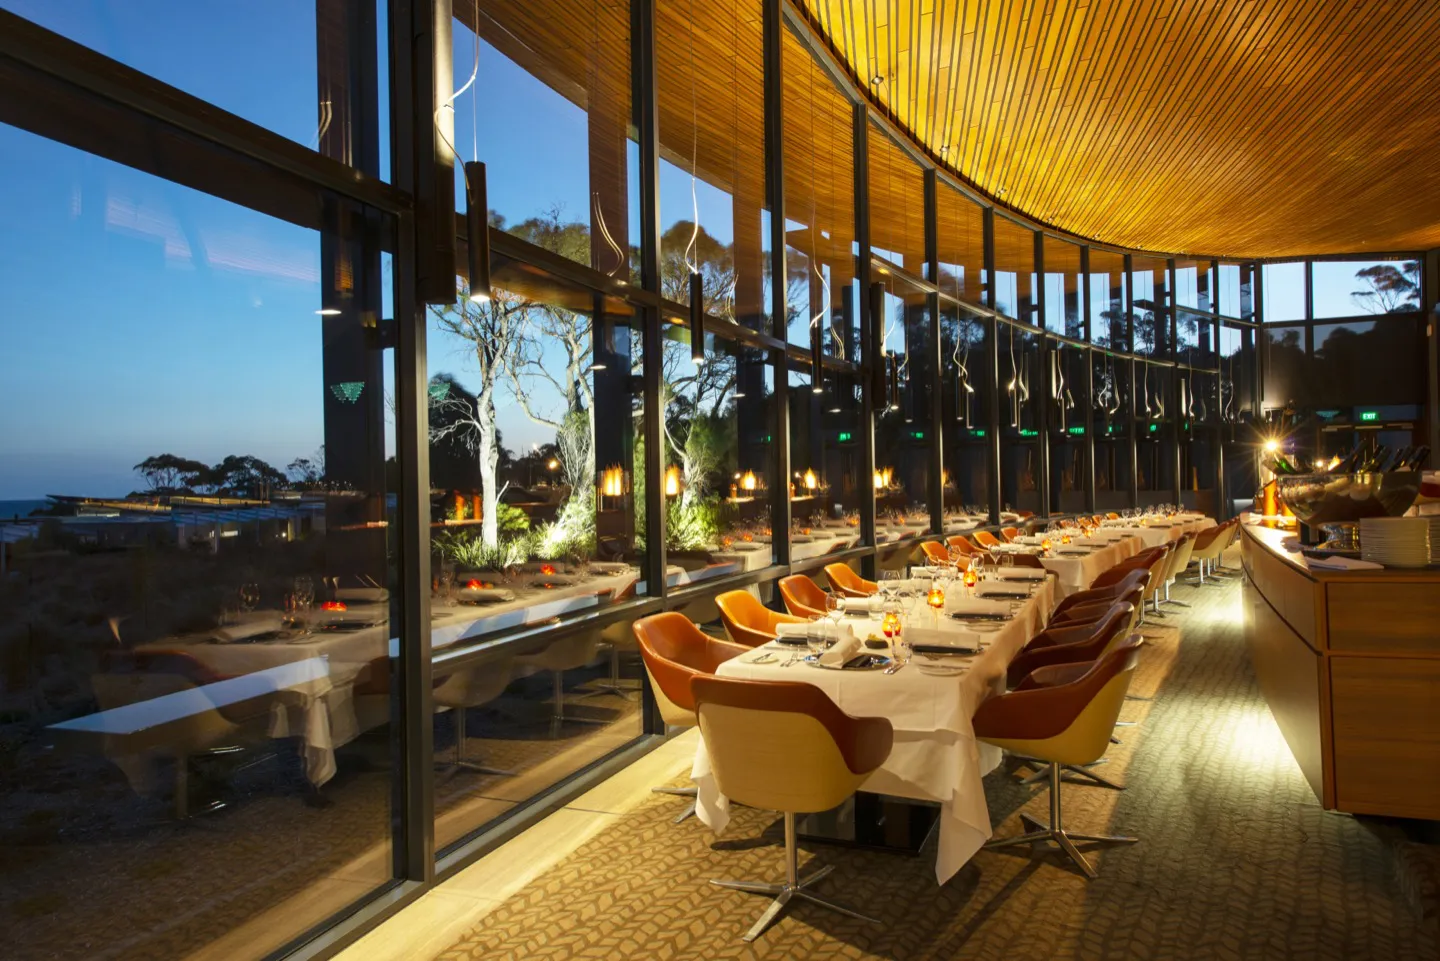 Private dining at Palate restaurant in luxury hotel Saffire Freycinet